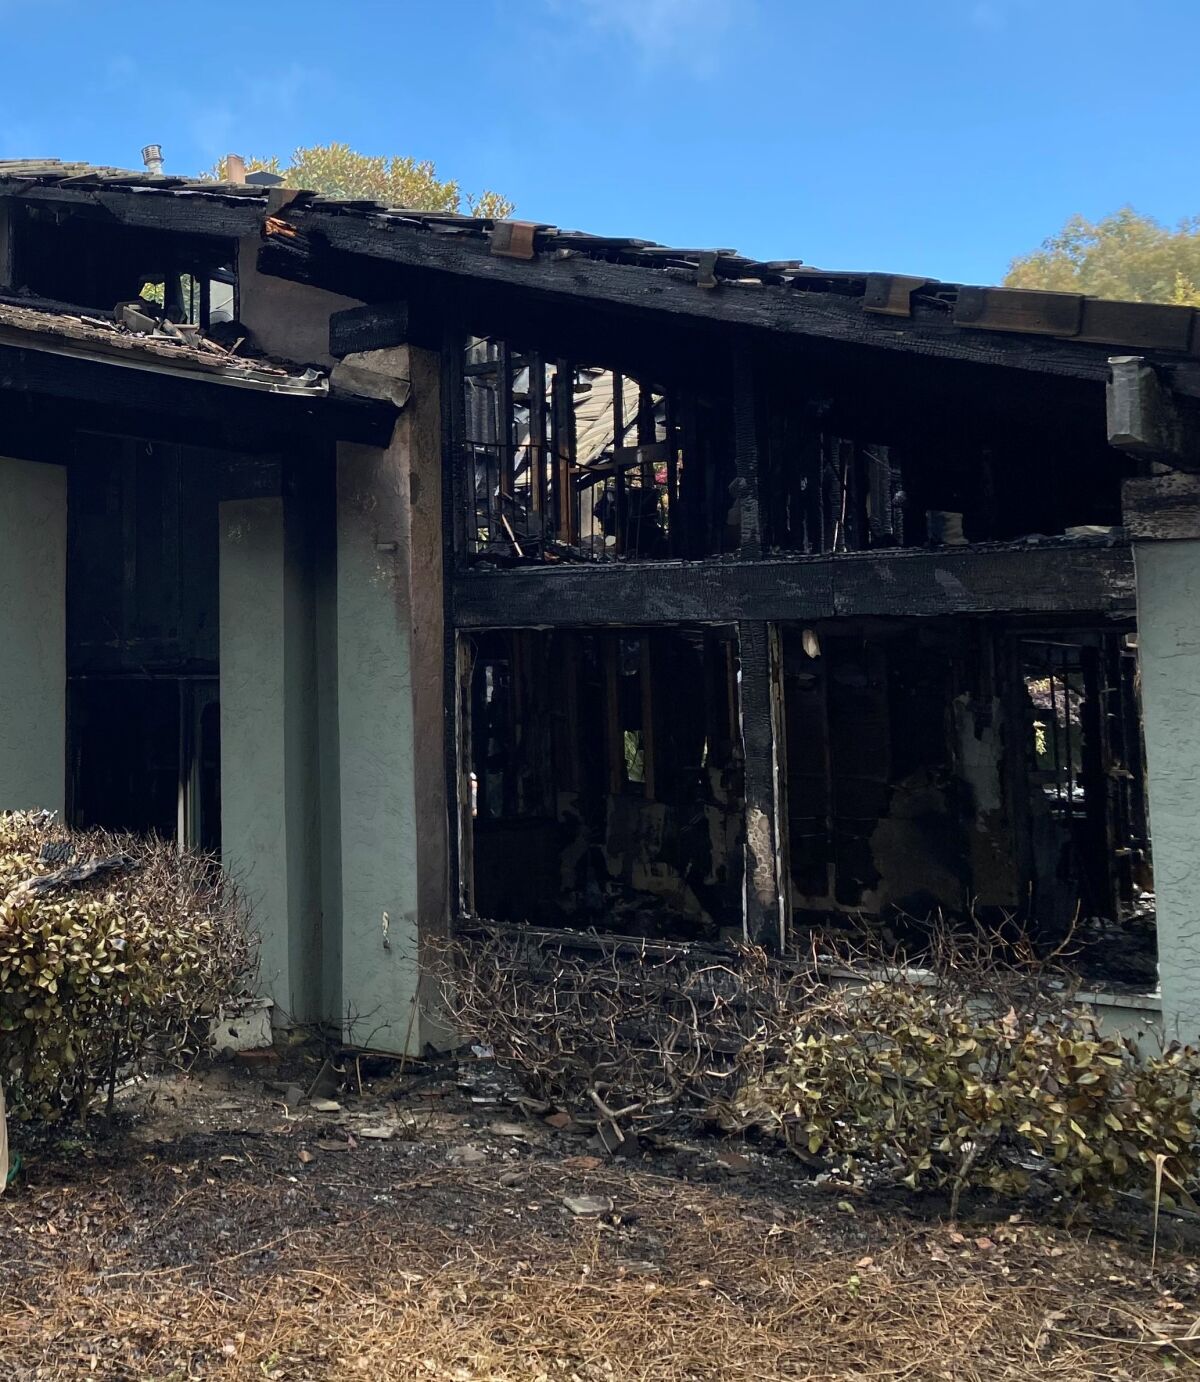 Fire destroyed a home in the 2500 block of Caminito La Paz in La Jolla on Aug. 10. Two bodies were found inside.